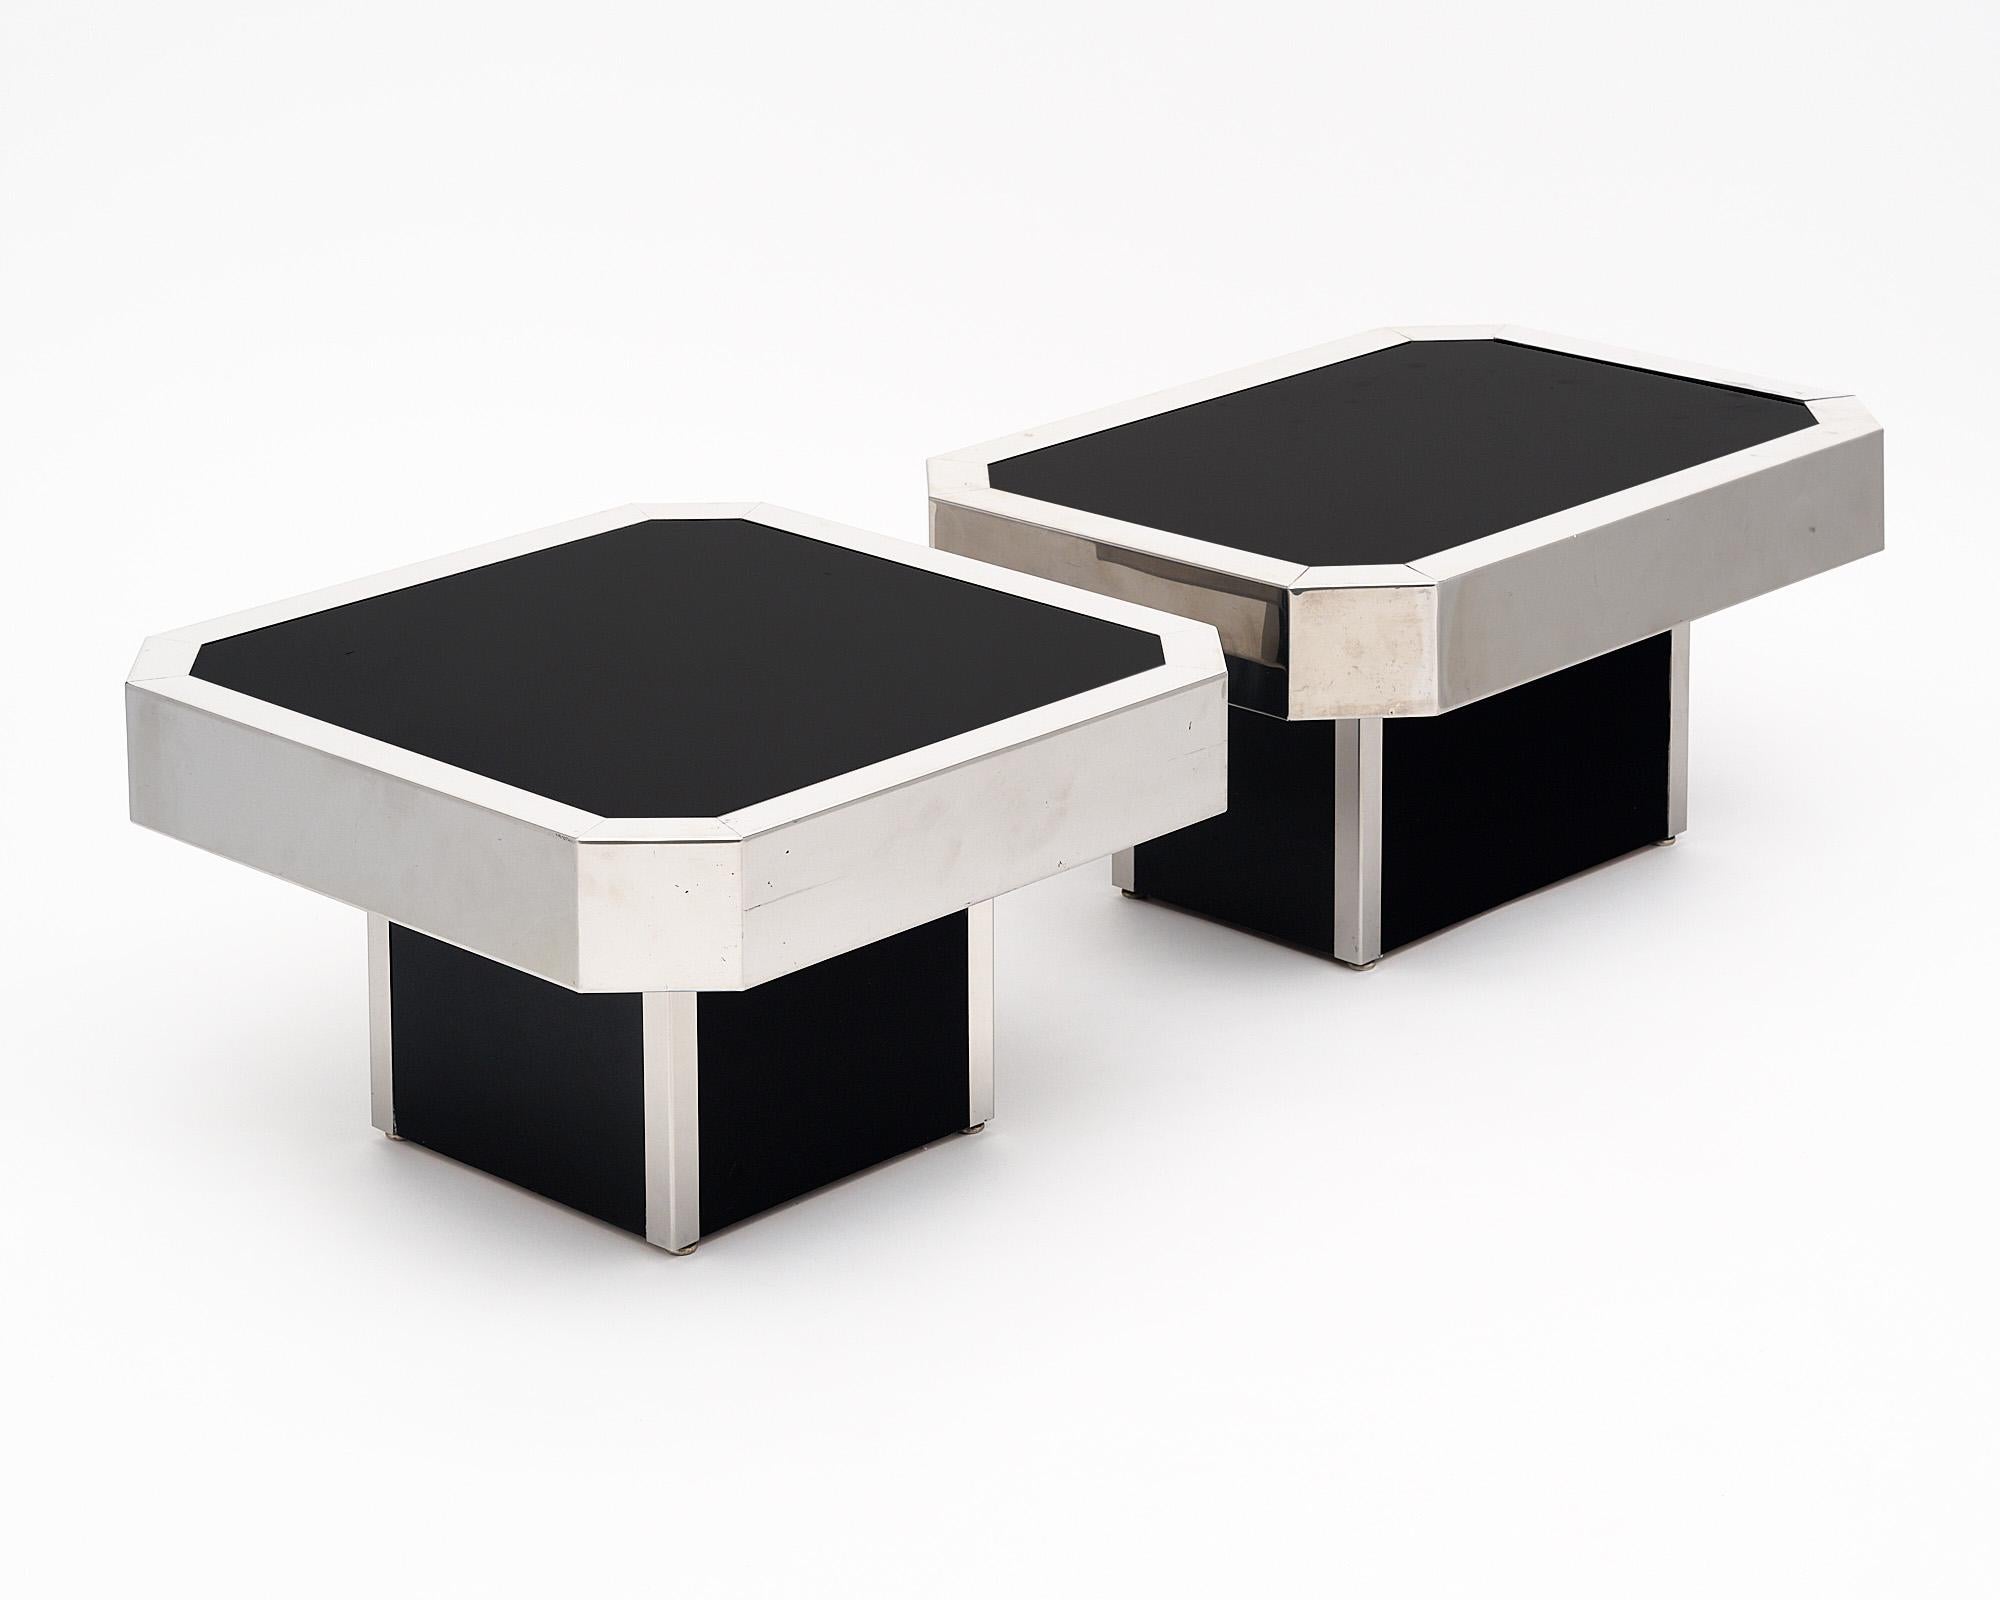 Pair of side tables in the style of renowned designer and artist Willy Rizzo. This pair is from Italy and features the iconic shape, a rectangle or square with cut corners. Each has a black glass top completely trimmed with chrome. One is a longer